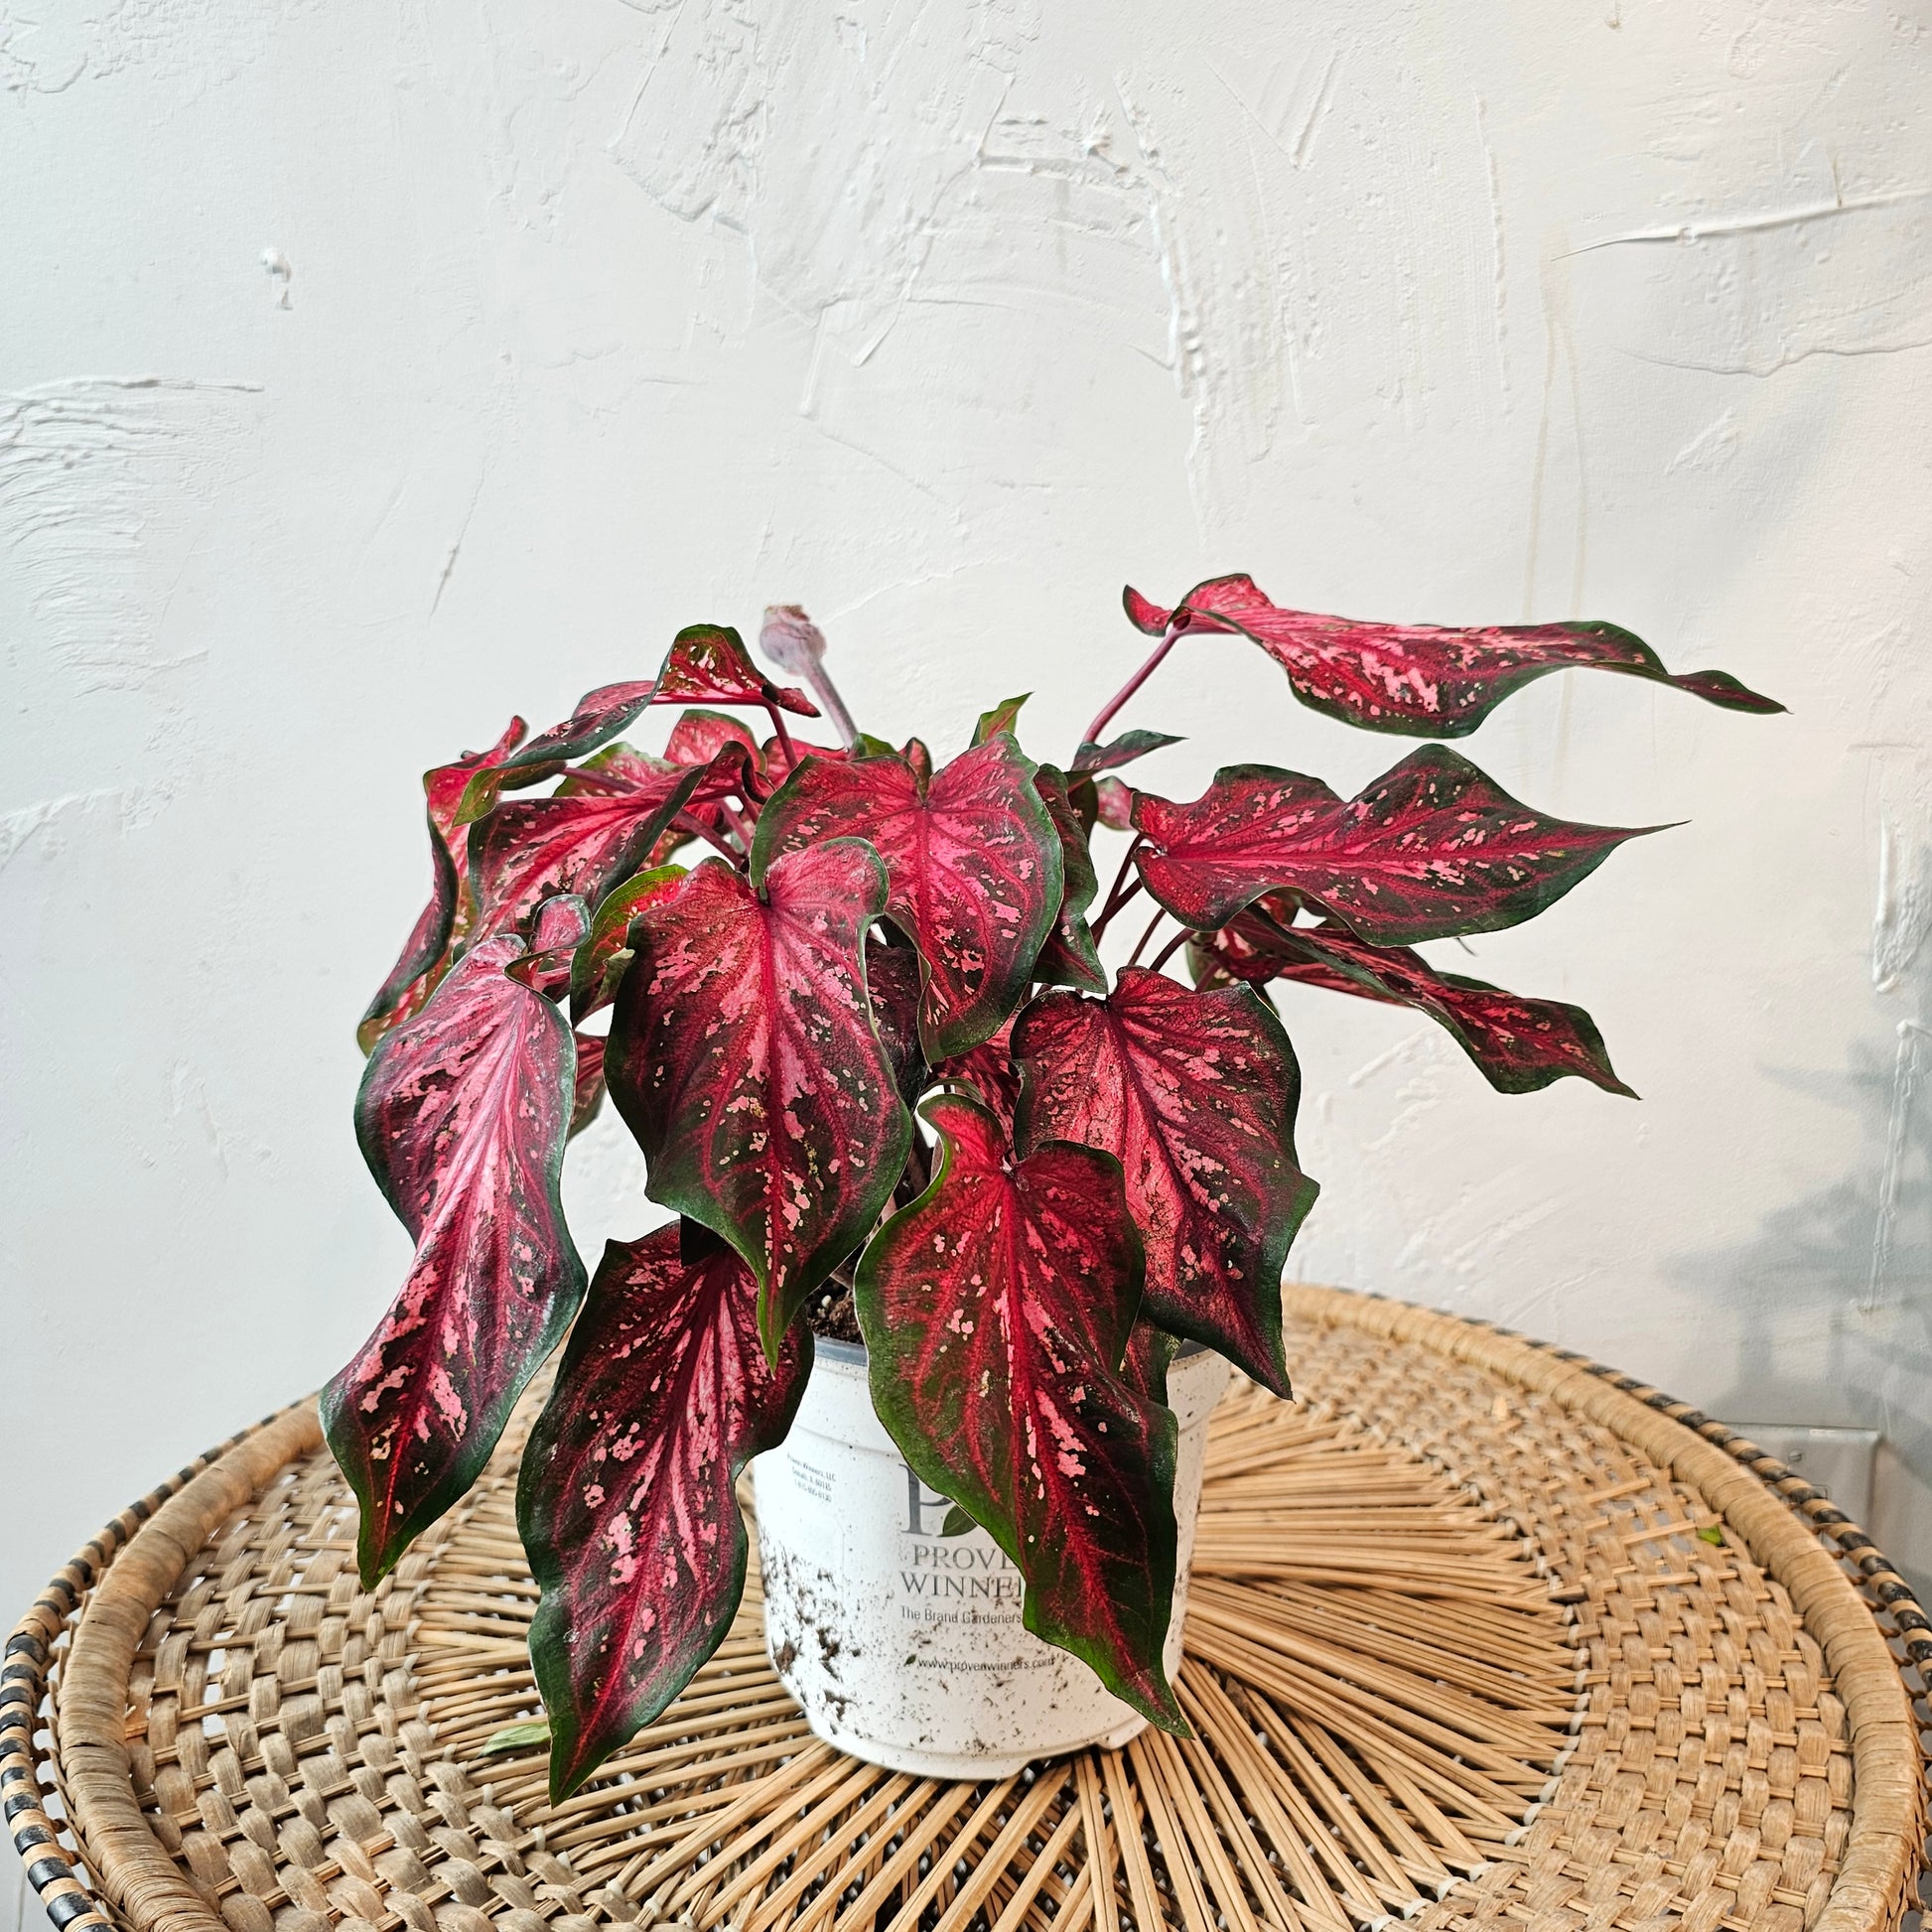 Scarlet Flame Caladium (Caladium 'Scarlet Flame) in a 6 inch pot. Indoor plant for sale by Promise Supply for delivery and pickup in Toronto